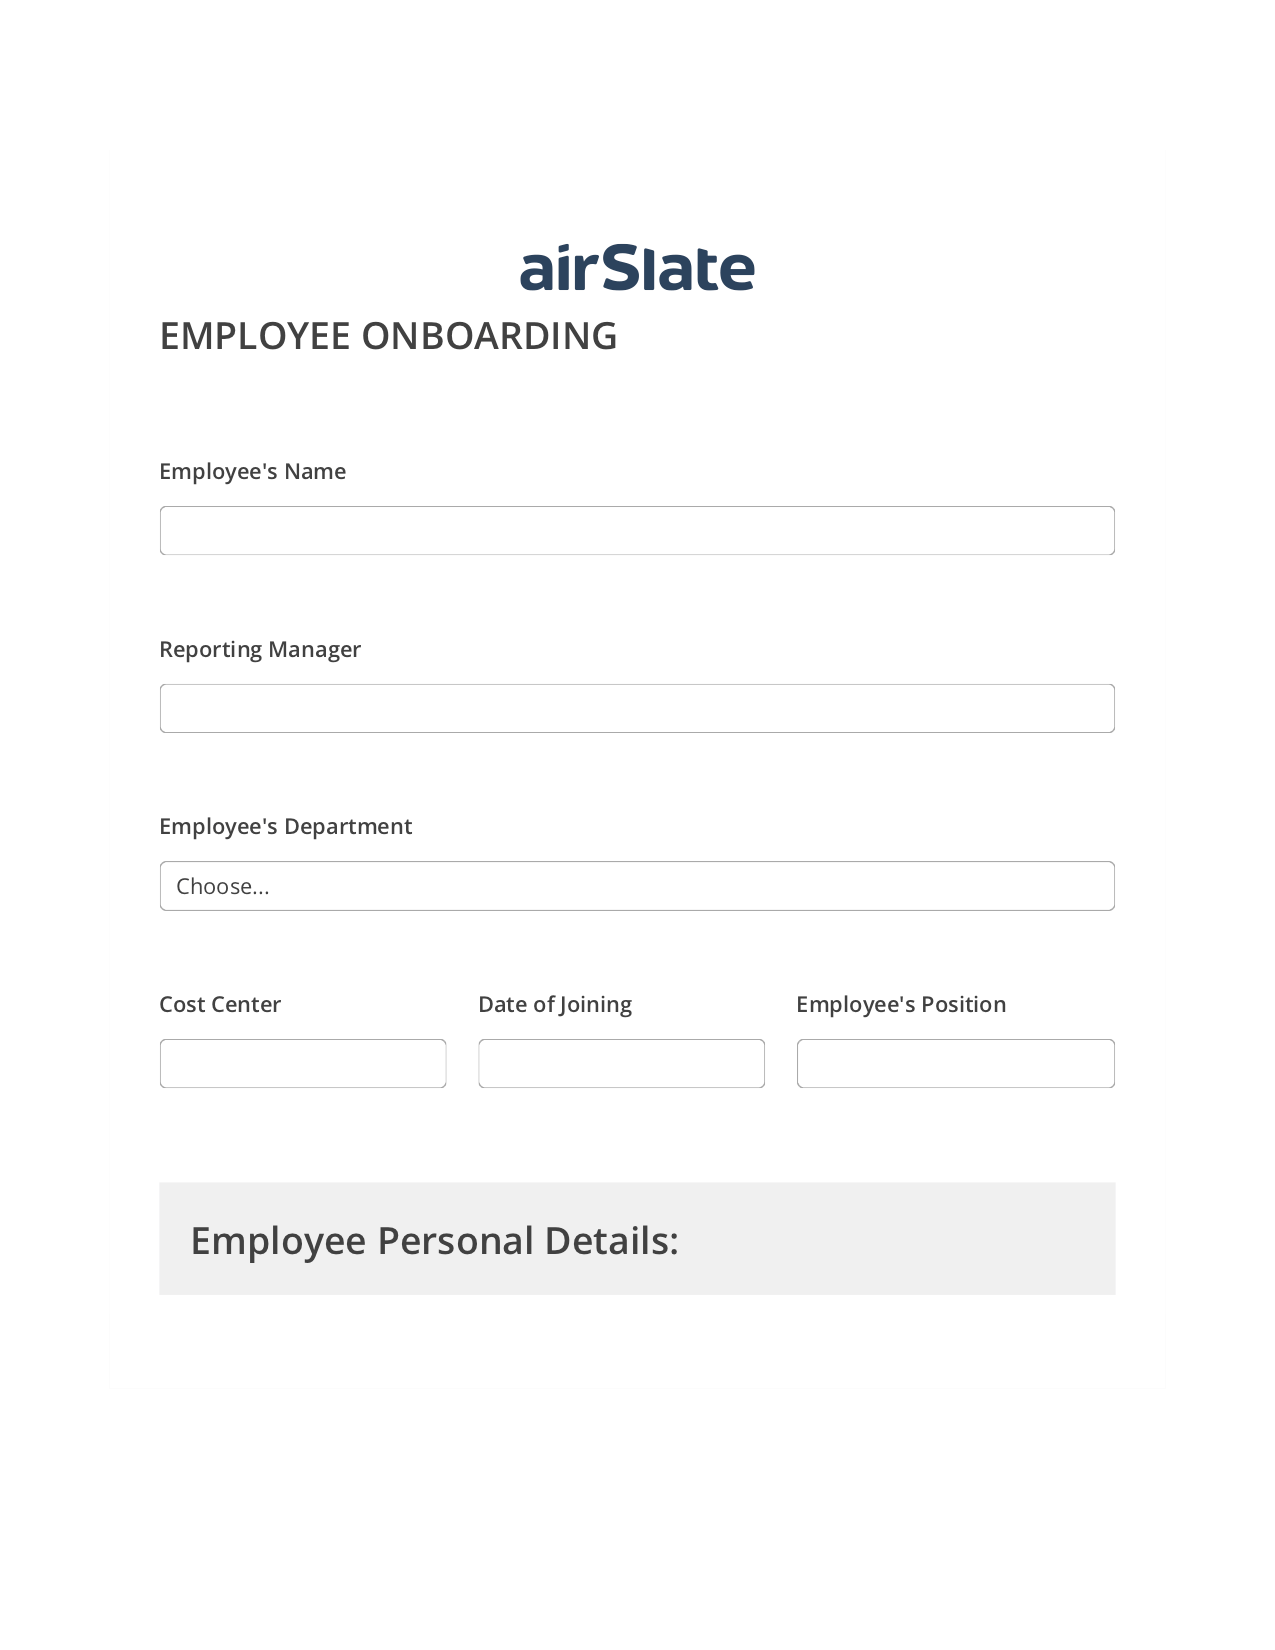 Employee Onboarding Workflow Pre-fill from CSV File Bot, Create Slate every Google Sheet Update Bot, Export to WebMerge Bot